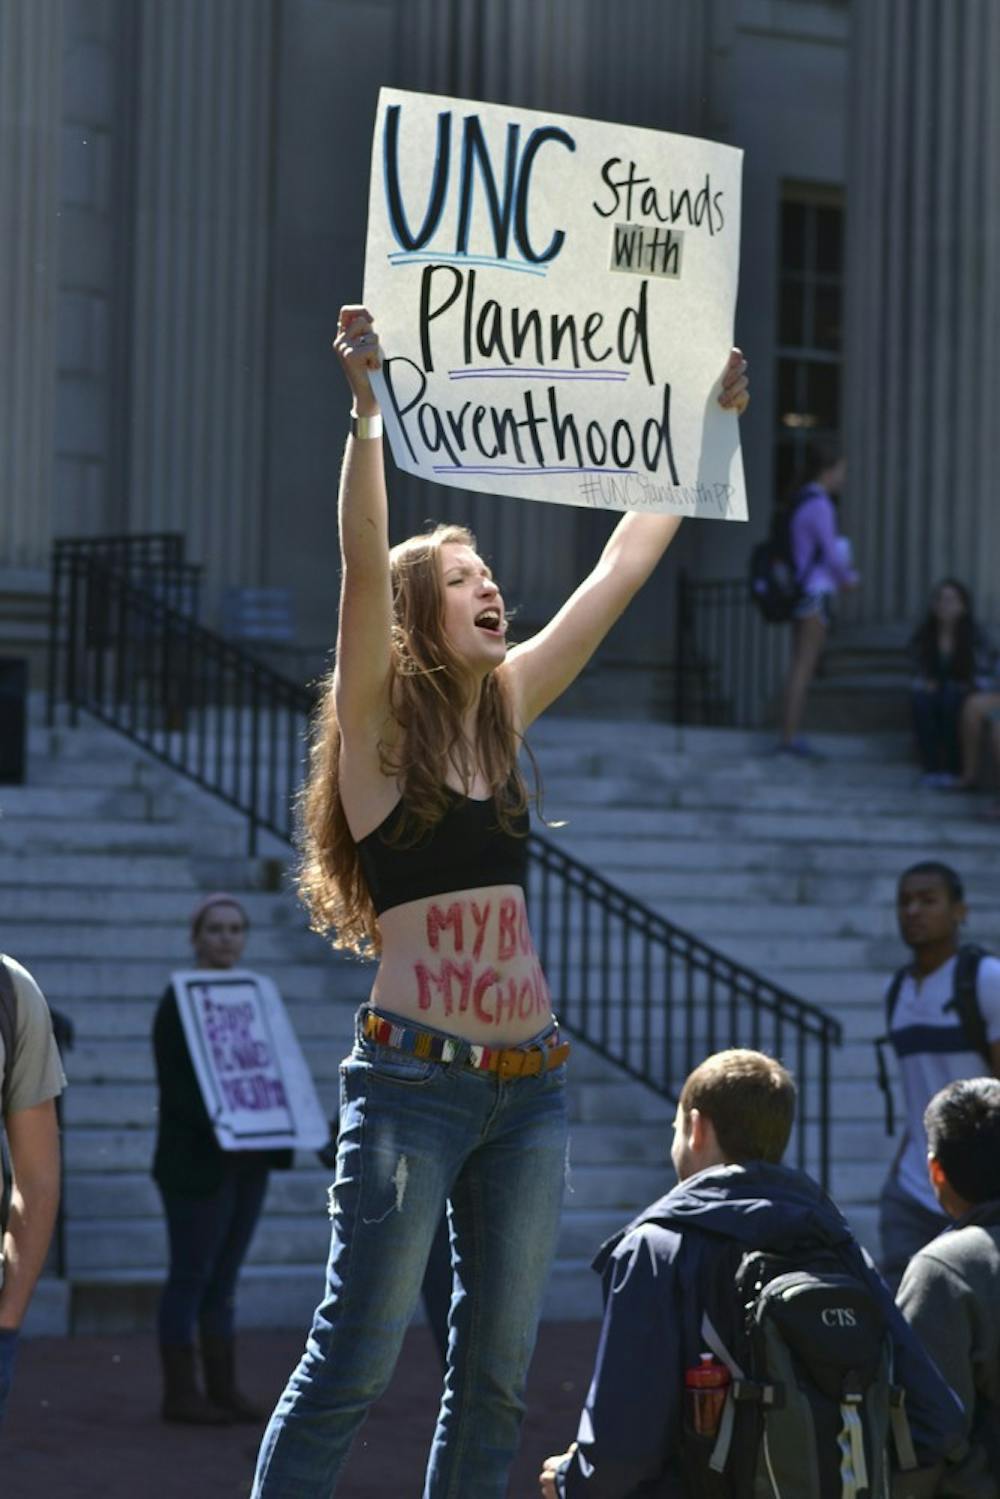 Rachel Allen, a sophomore at UNC, grabs the attention of passersby to encourage the discussion of Planned Parenthood.